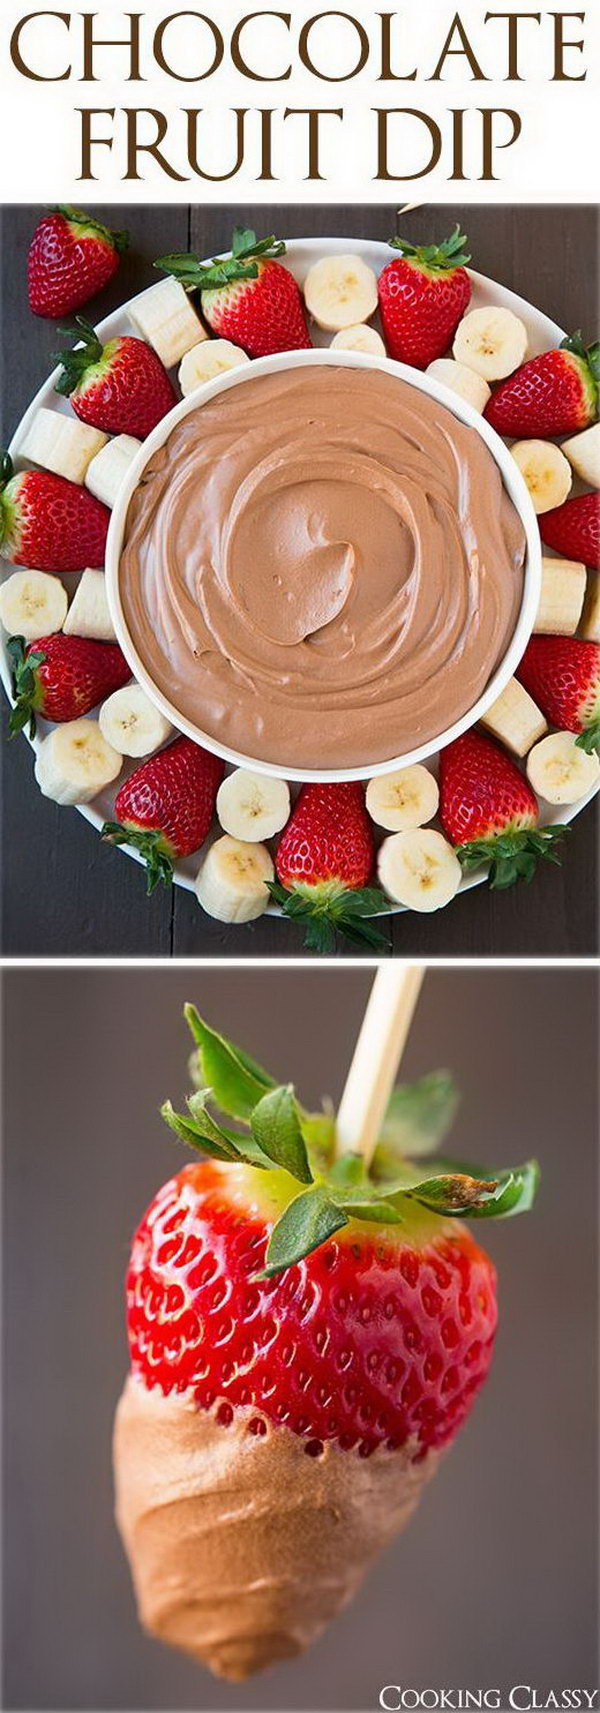 Chocolate fruit dip. Use an electric hand mixer to whip cream, powdered sugar, cocoa powder, and cream cheese to get a good addition to dip bananas and strawberries for a sweet, creamy taste. It couldn't be better to celebrate your child's birthday party. 